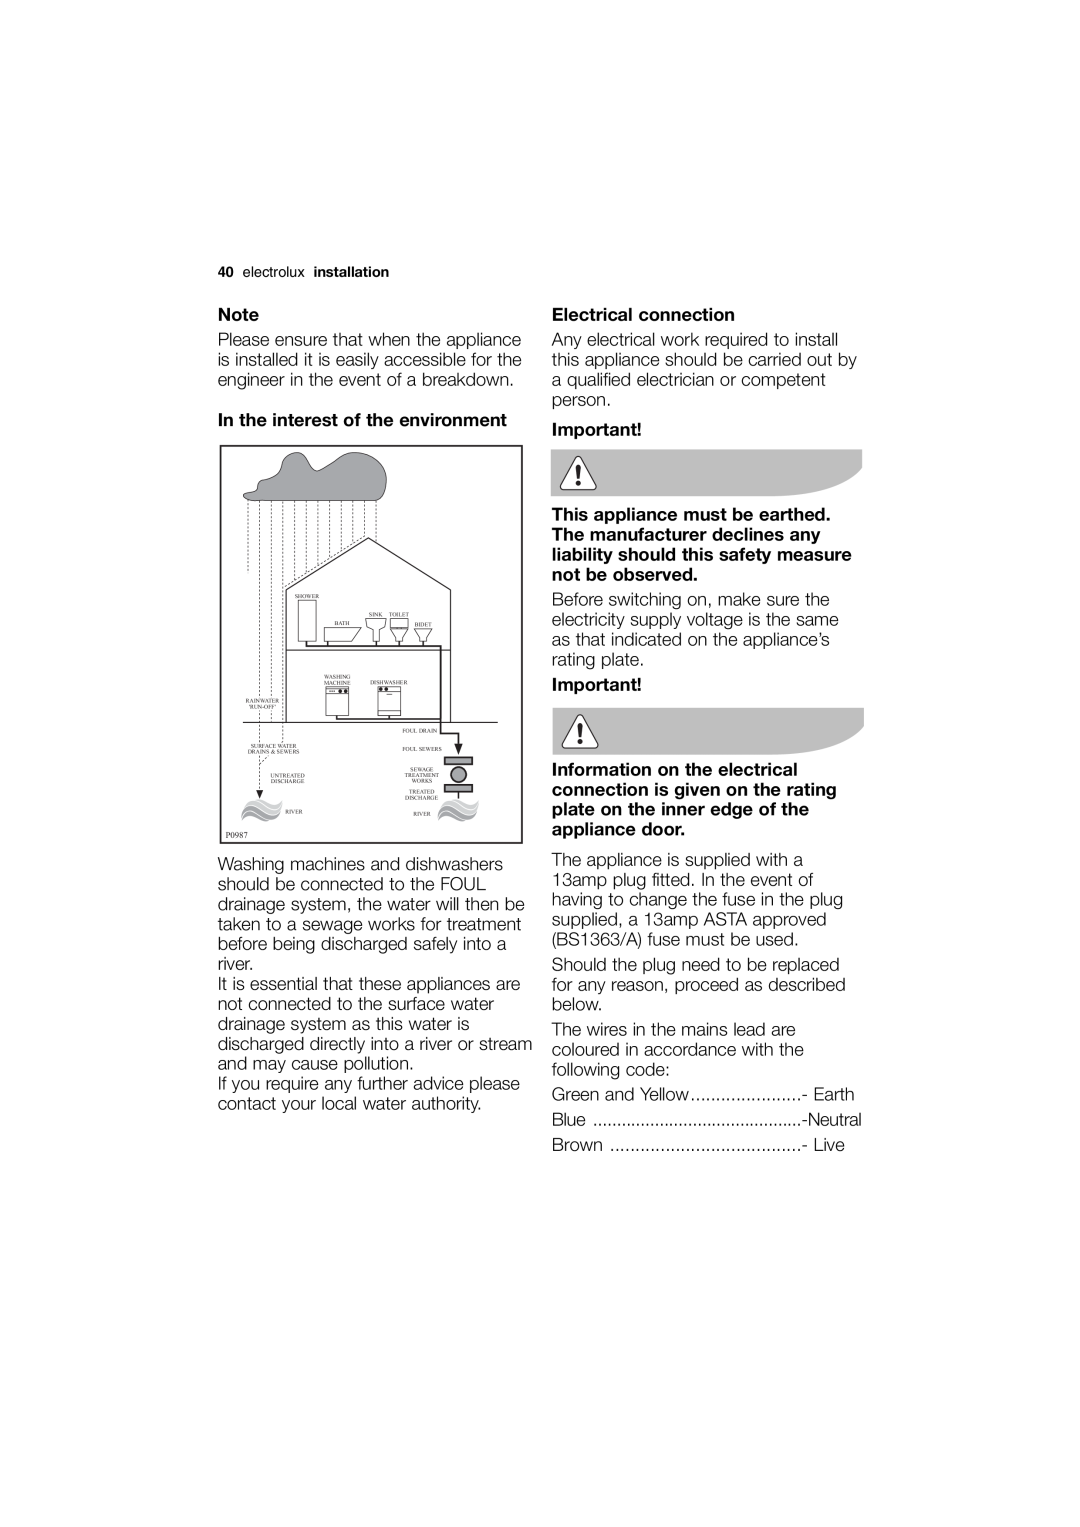 Electrolux EWN 13570 W user manual In the interest of the environment, Electrical connection, Earth 